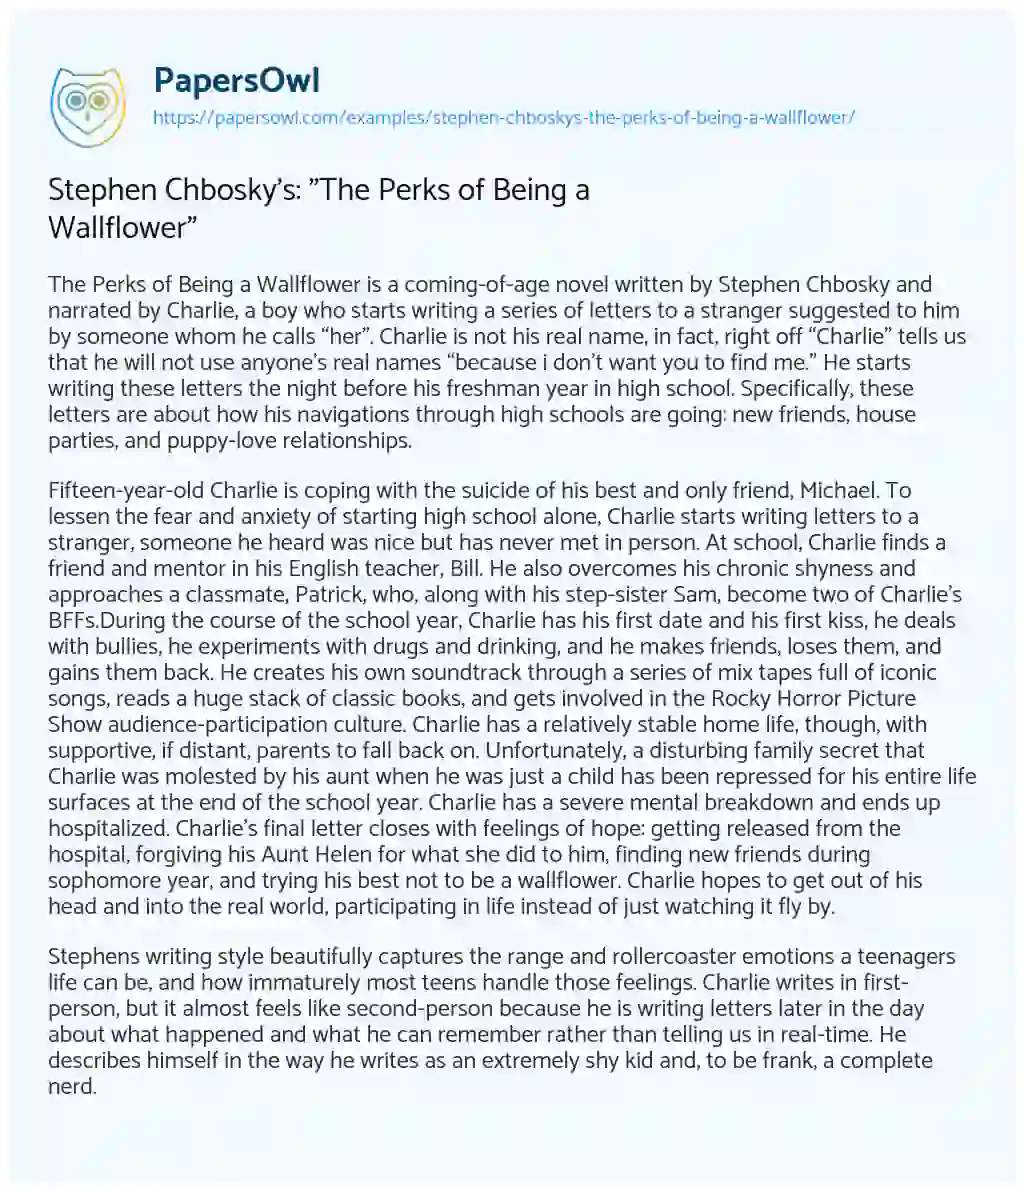 Essay on Stephen Chbosky’s: “The Perks of being a Wallflower”